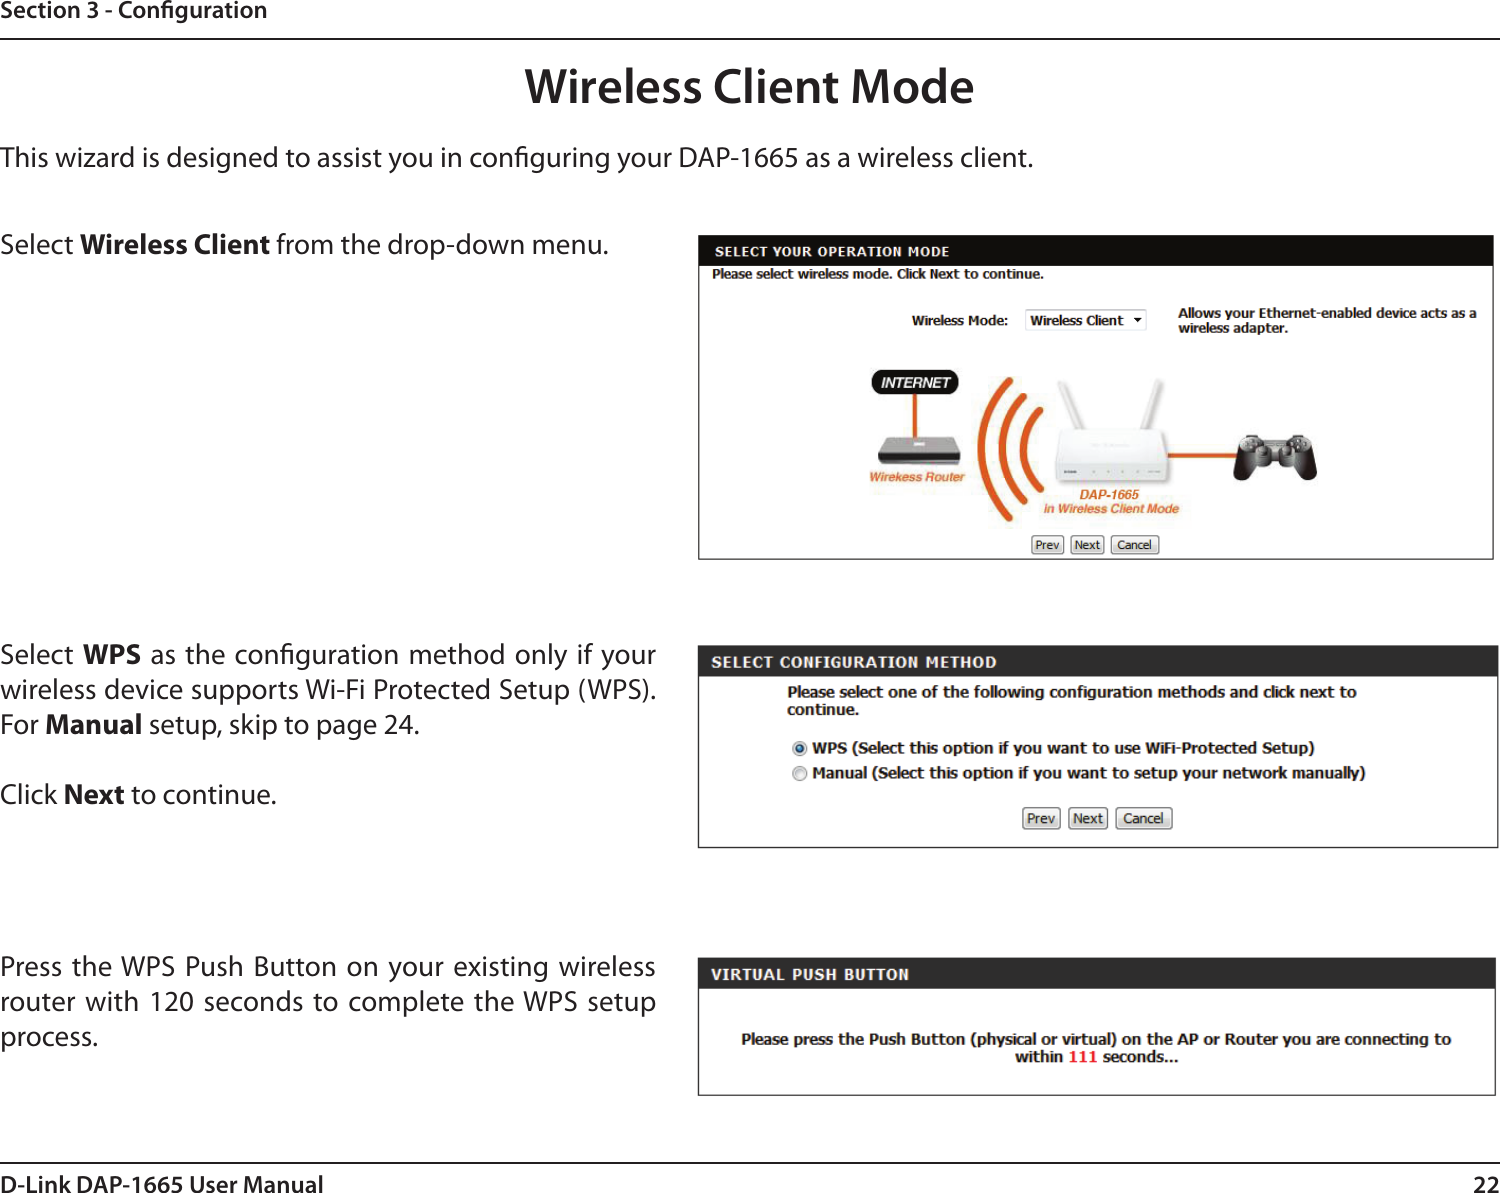 22D-Link DAP-1665 User ManualSection 3 - CongurationThis wizard is designed to assist you in conguring your DAP-1665 as a wireless client.Wireless Client ModeSelect Wireless Client from the drop-down menu. Select WPS as the conguration method only if your wireless device supports Wi-Fi Protected Setup (WPS). For Manual setup, skip to page 24.Click Next to continue.Press the WPS  Push Button on your existing wireless router with 120 seconds to complete the WPS setup process. 